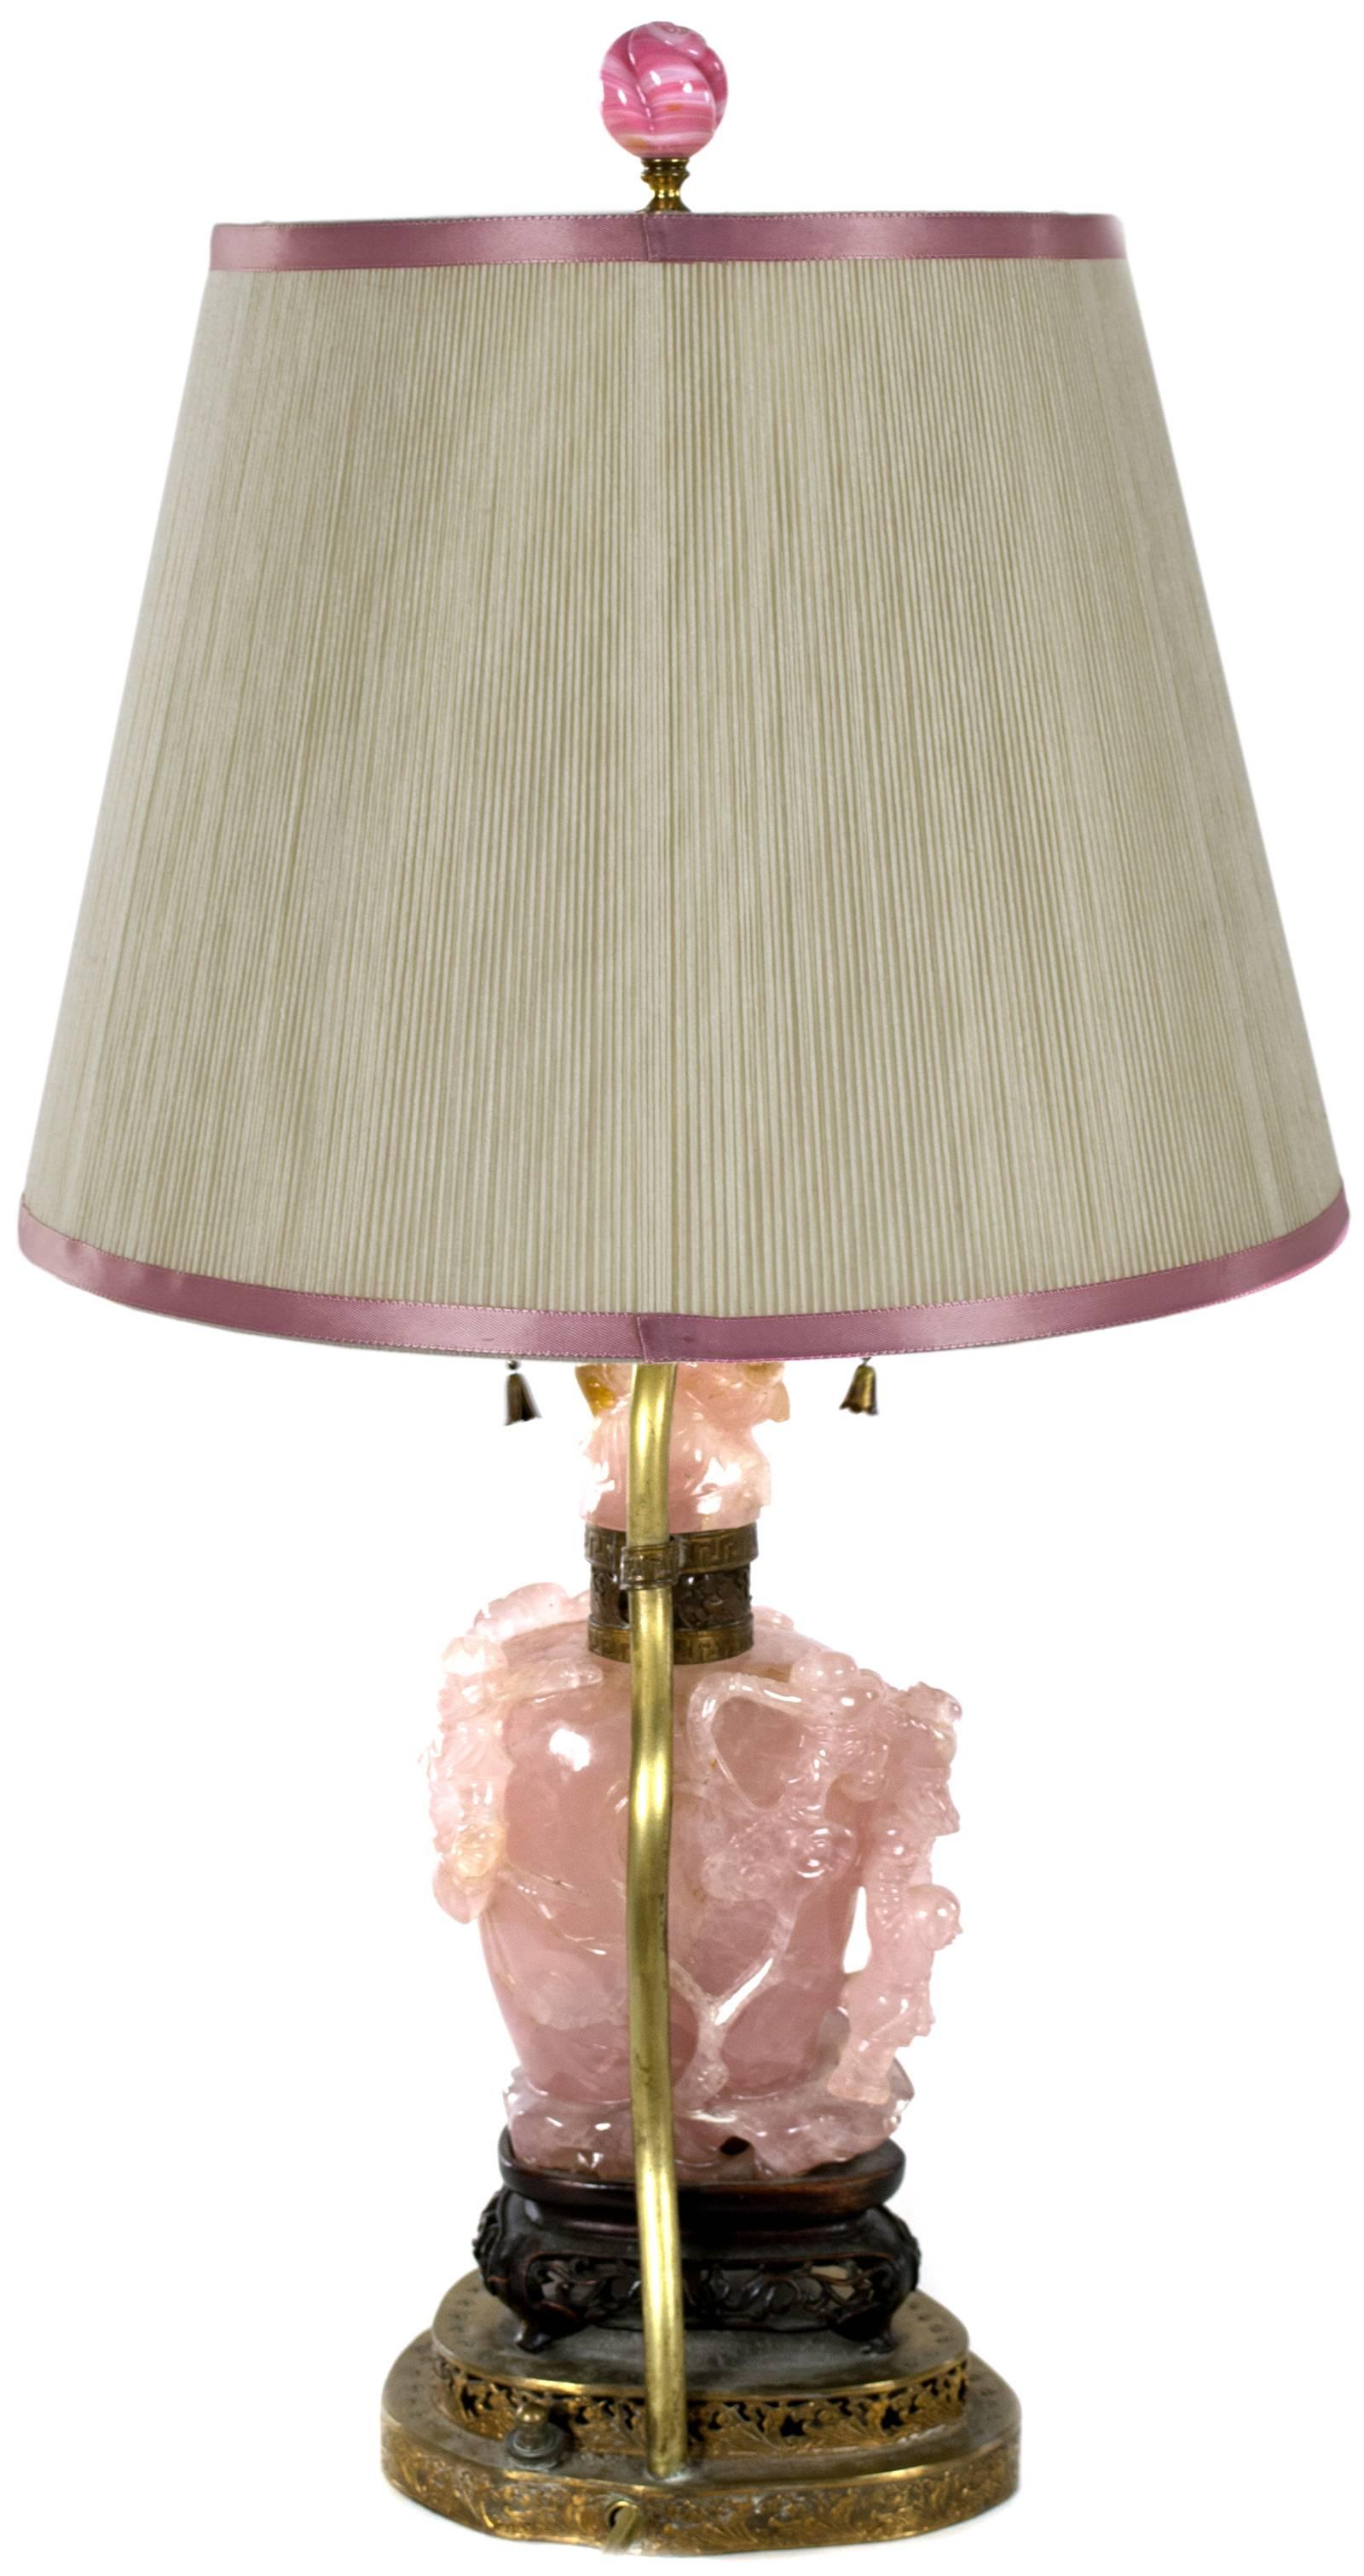 Set on an ormolu stand, this rose quartz table lamp is carved with various figures, shells, and foliage. In addition to the two light bulbs beneath the shade, the interior is lit with another light.